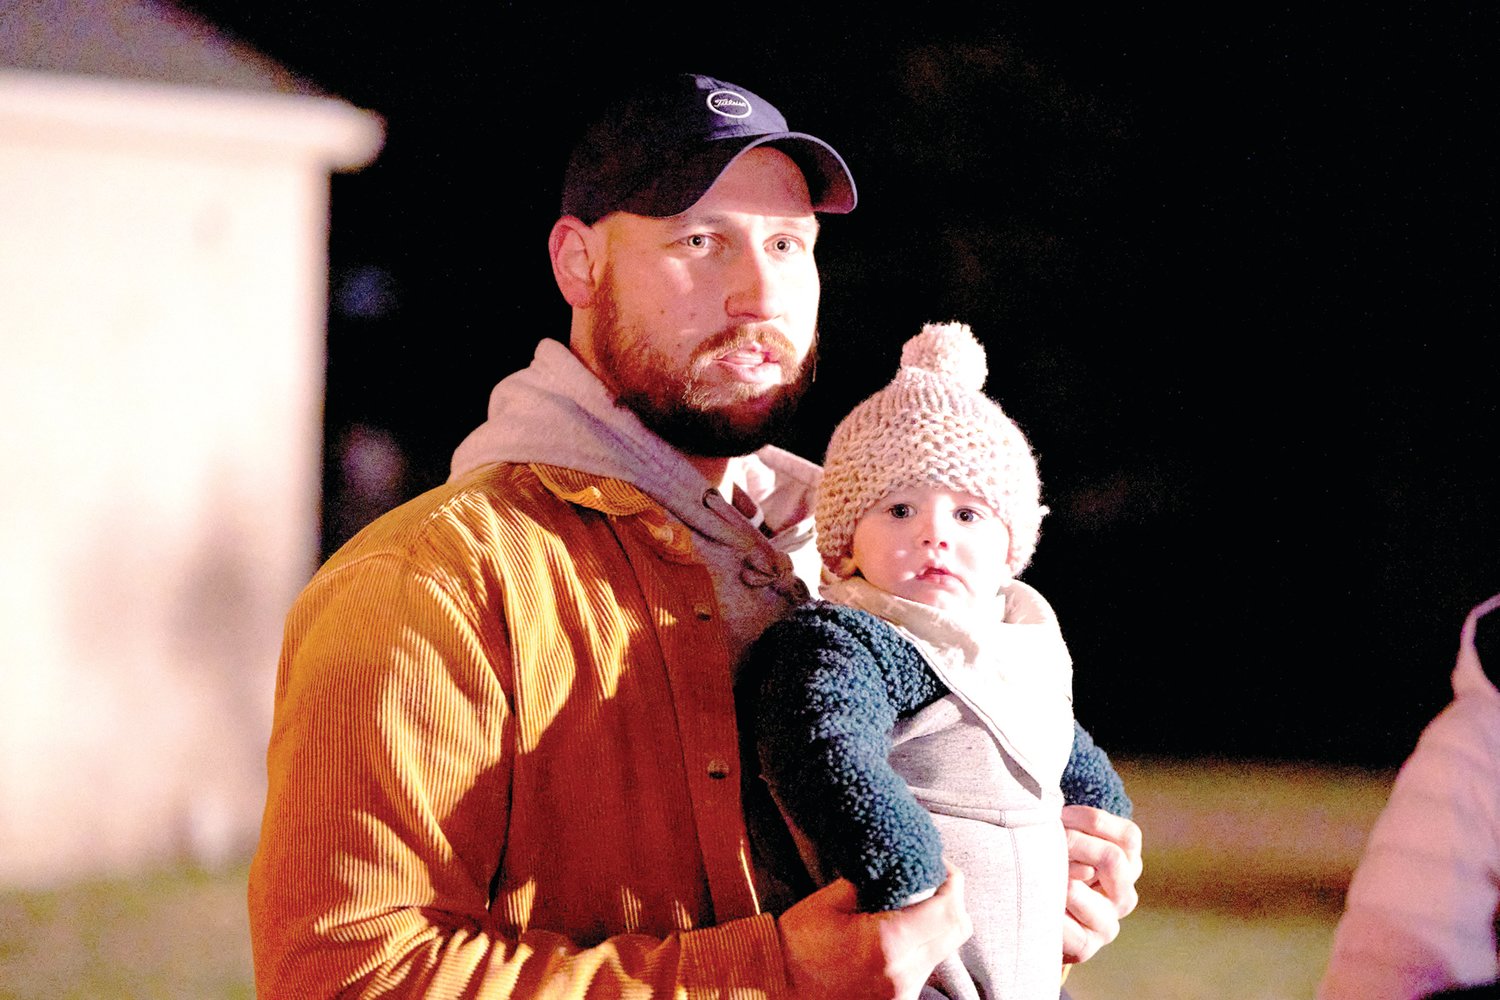 Greg Pinelli and his 8-month-old son Jack listen to the music at Bristol’s Mill Street Fire & Ice Festival Friday, Jan. 20, 2023, in Bristol Borough.